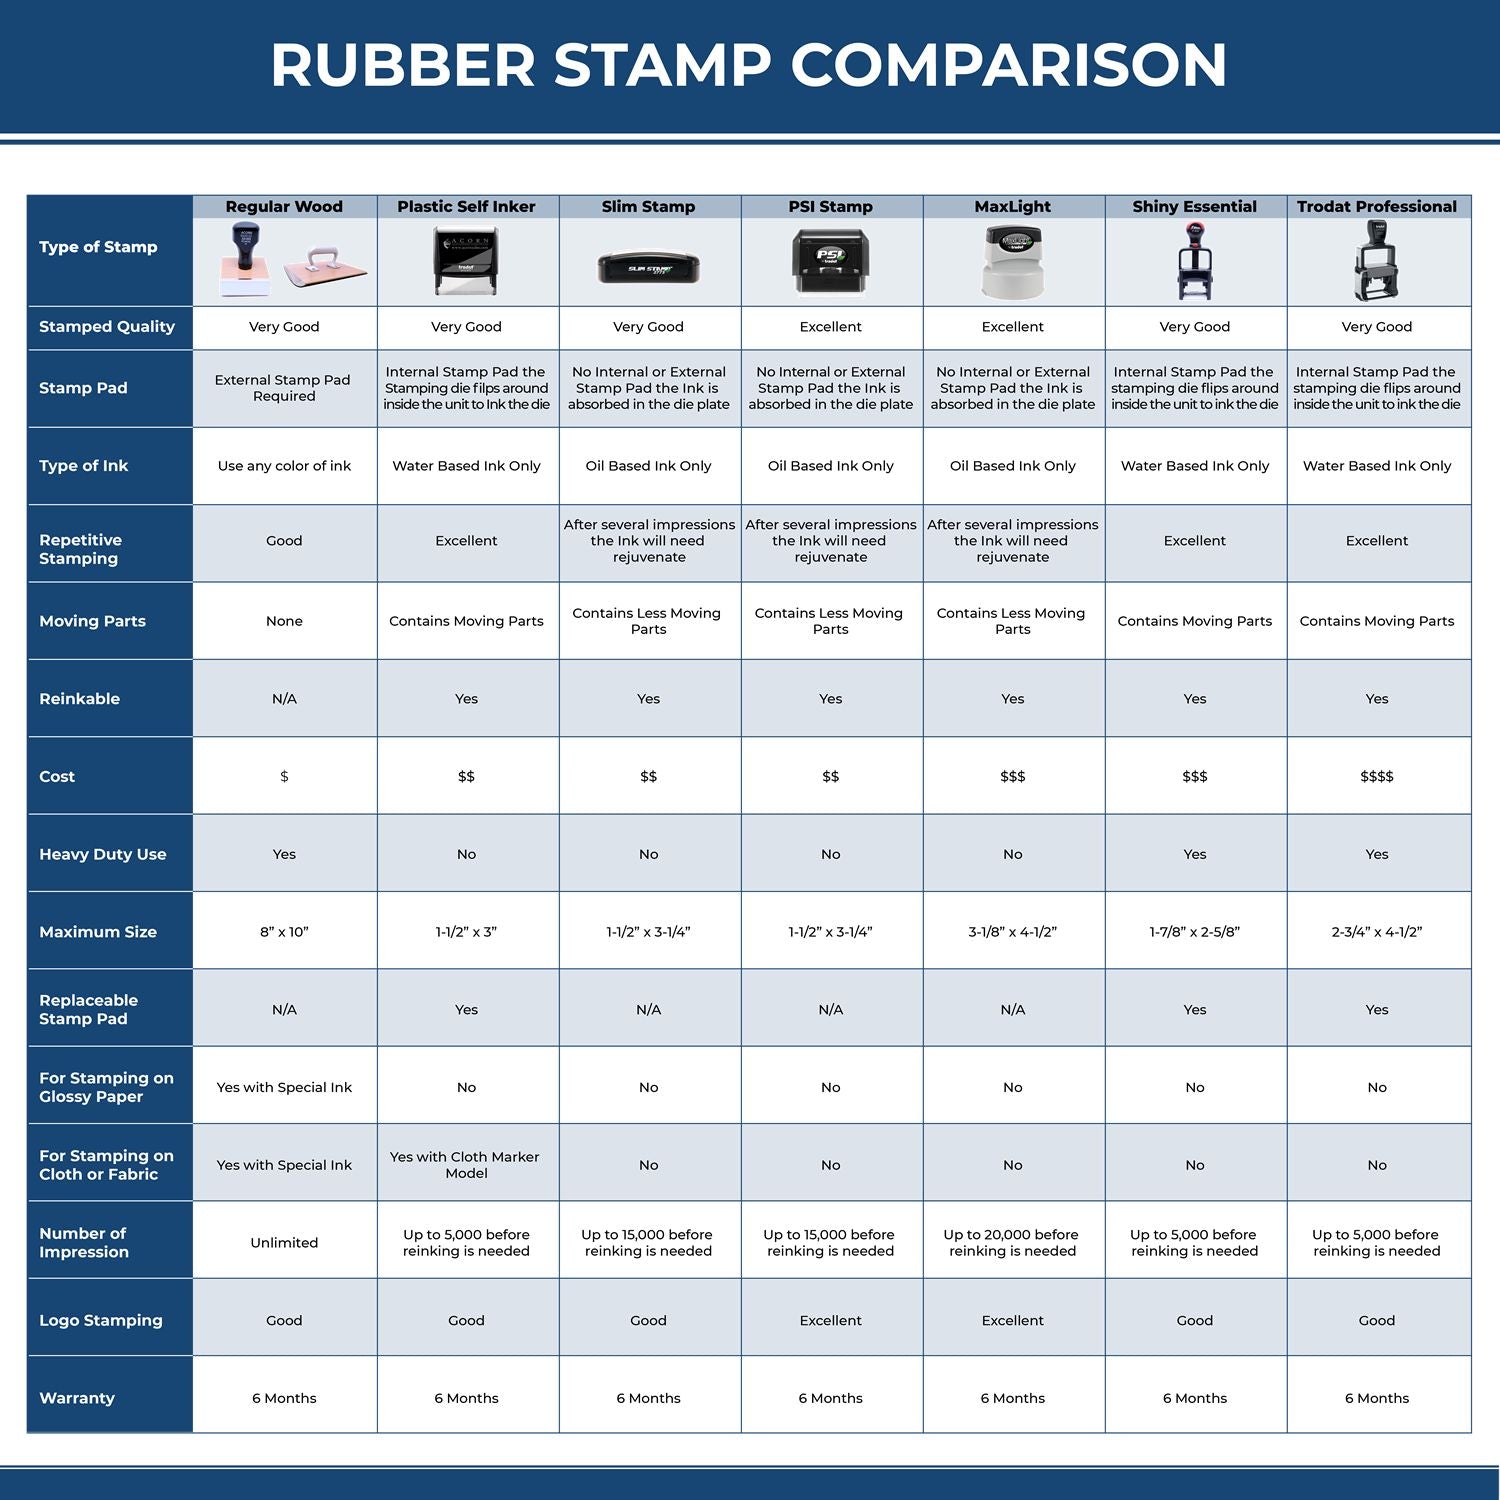 A comparison chart for the different types of mount models available for the Self-Inking Oklahoma PE Stamp.